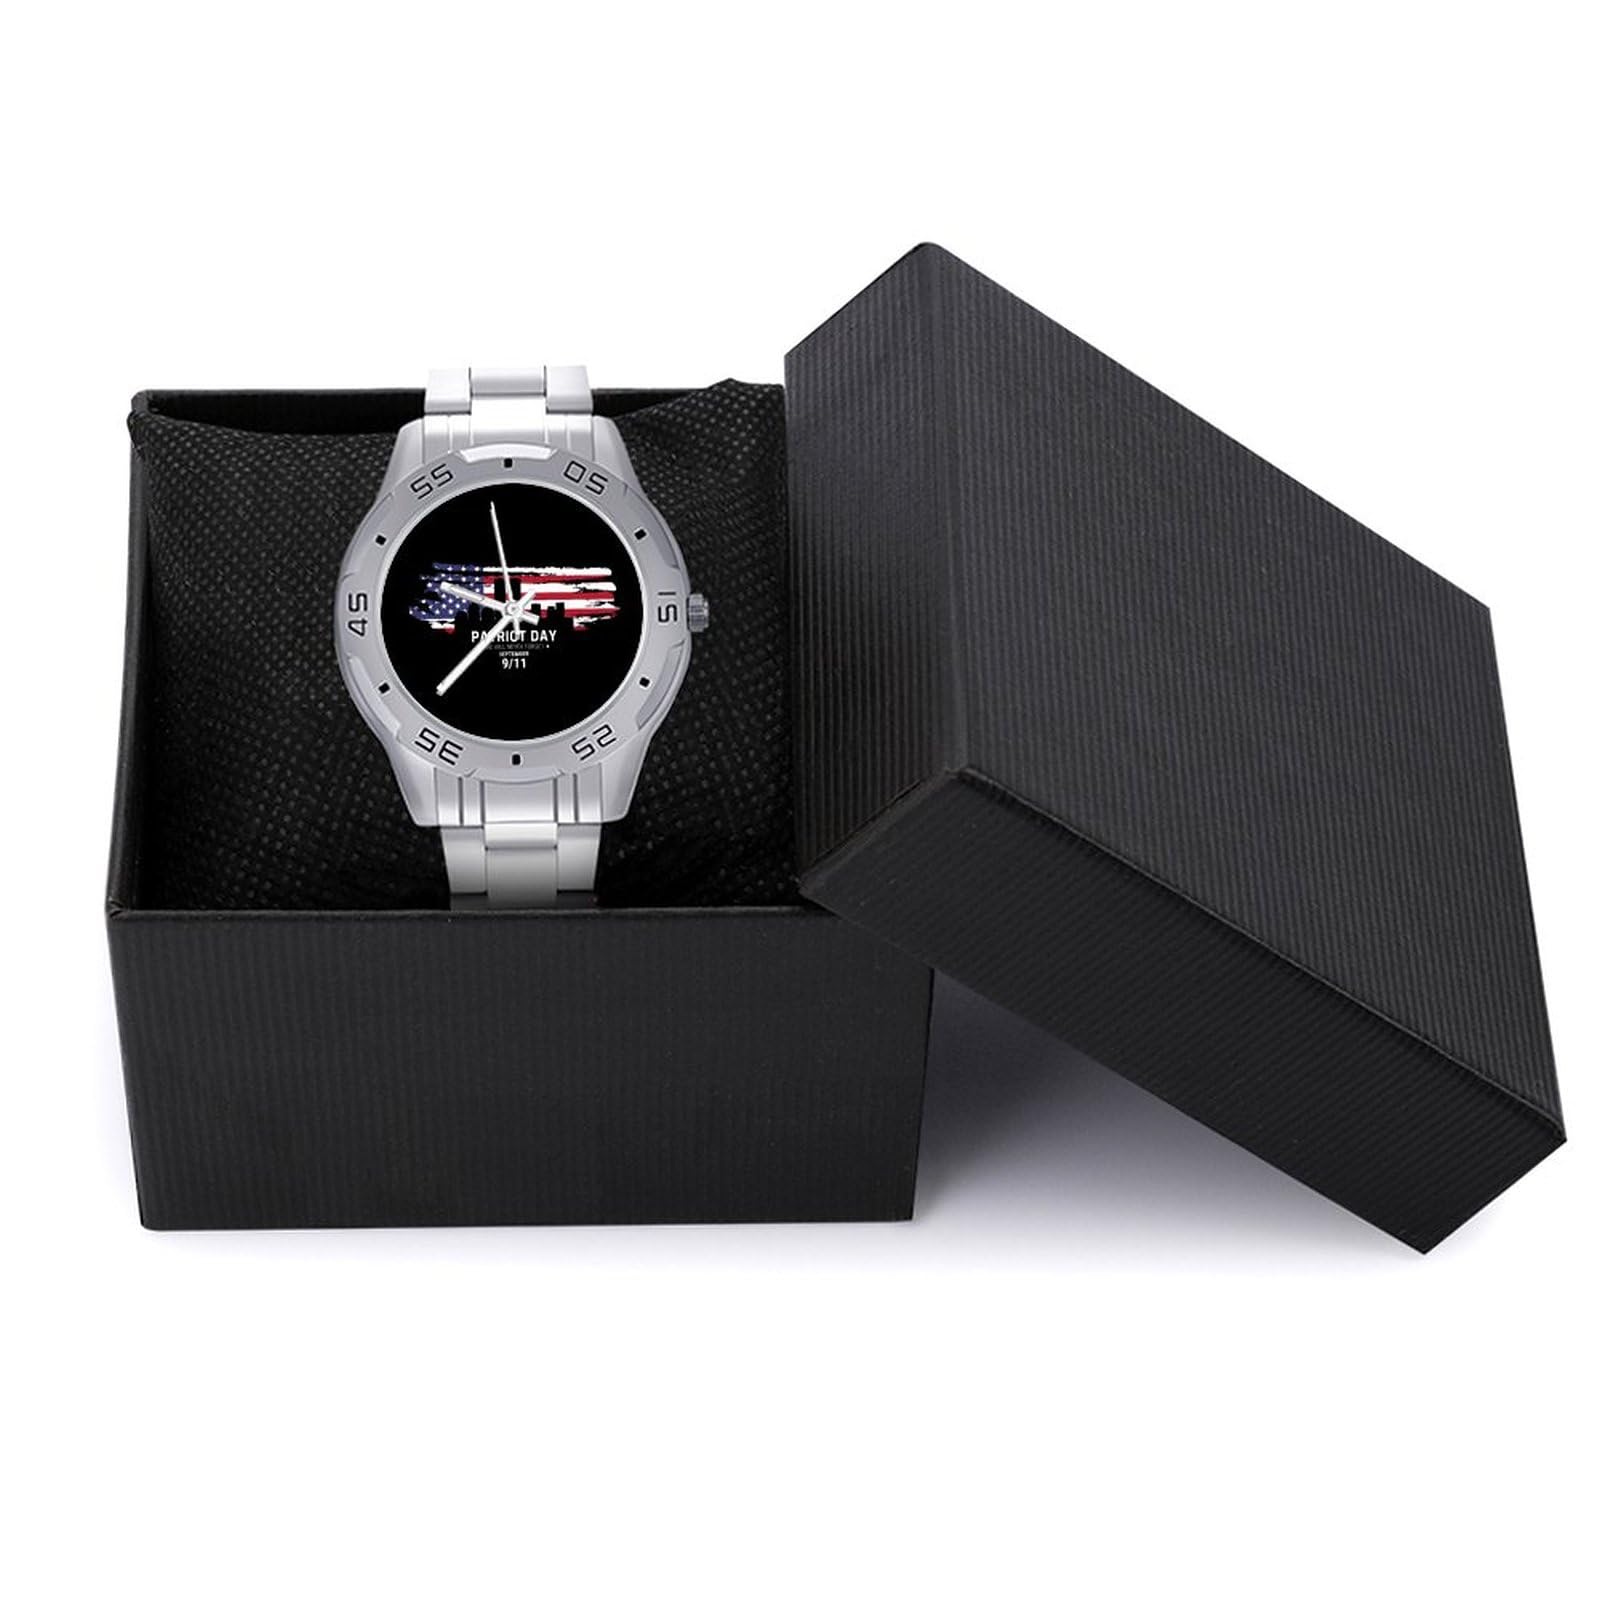 911 Remember Never Forget Stainless Steel Band Business Watch Dress Wrist Unique Luxury Work Casual Waterproof Watches